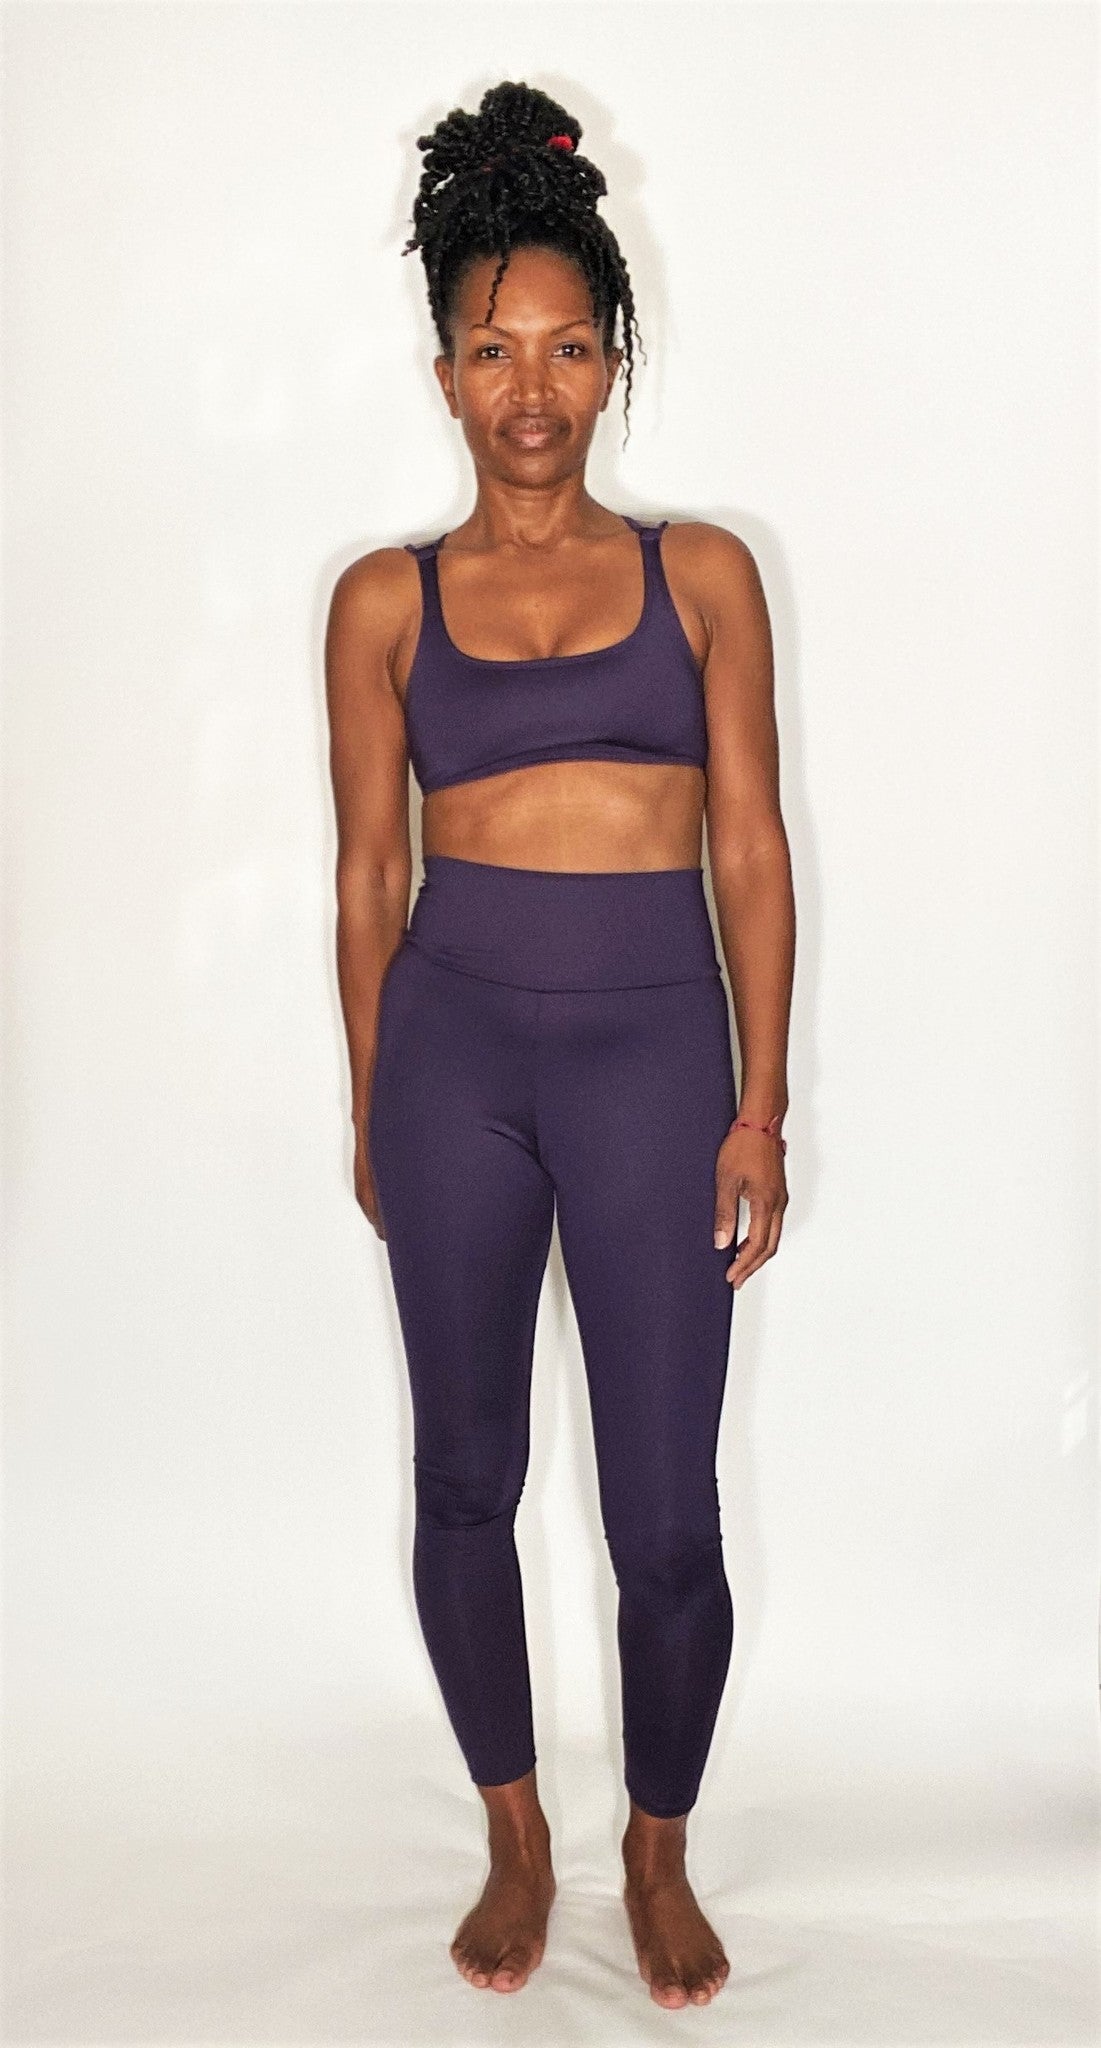 Brasini Fit High Waisted Leggings for Comfortable and Stylish